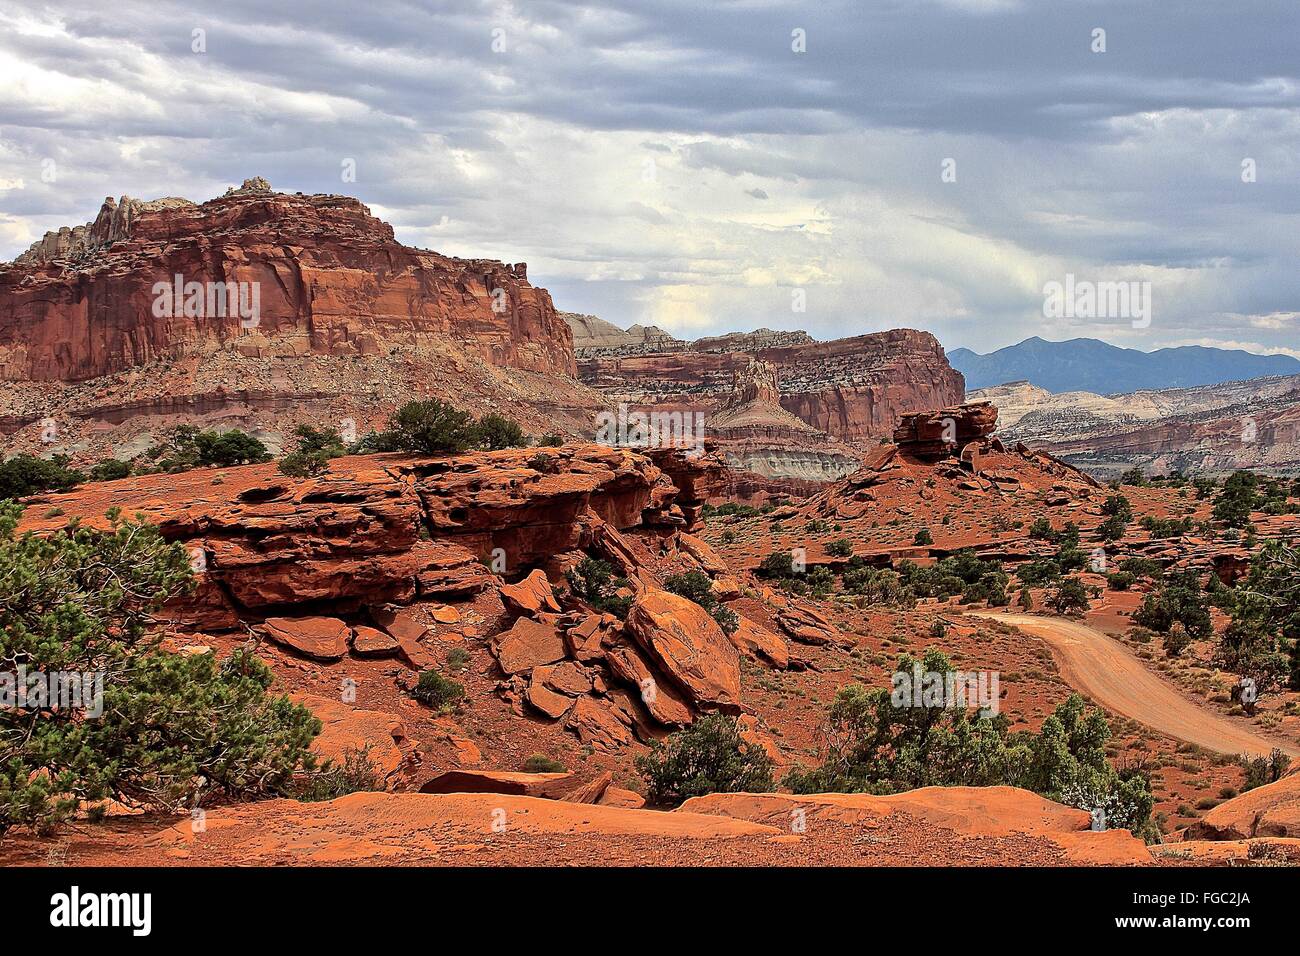 Idyllic Shot Of Rock Formation In Capitol Reef National Park Against Sky Stock Photo